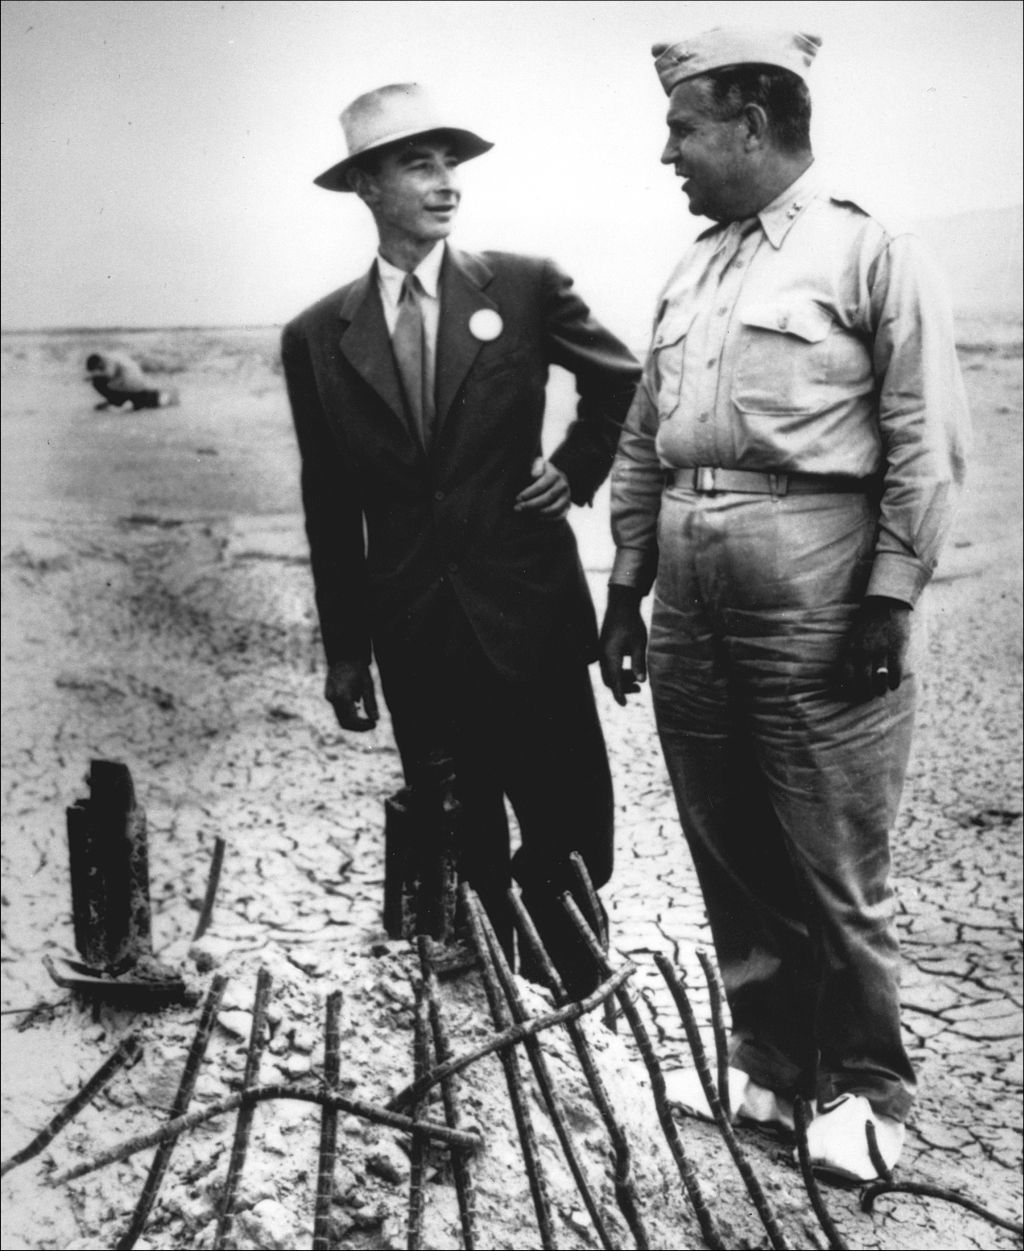 Physicist Robert Oppenheimer inspected damage from the blast at Ground Zero with Gen. Leslie Groves, military leader of the Manhattan Project.